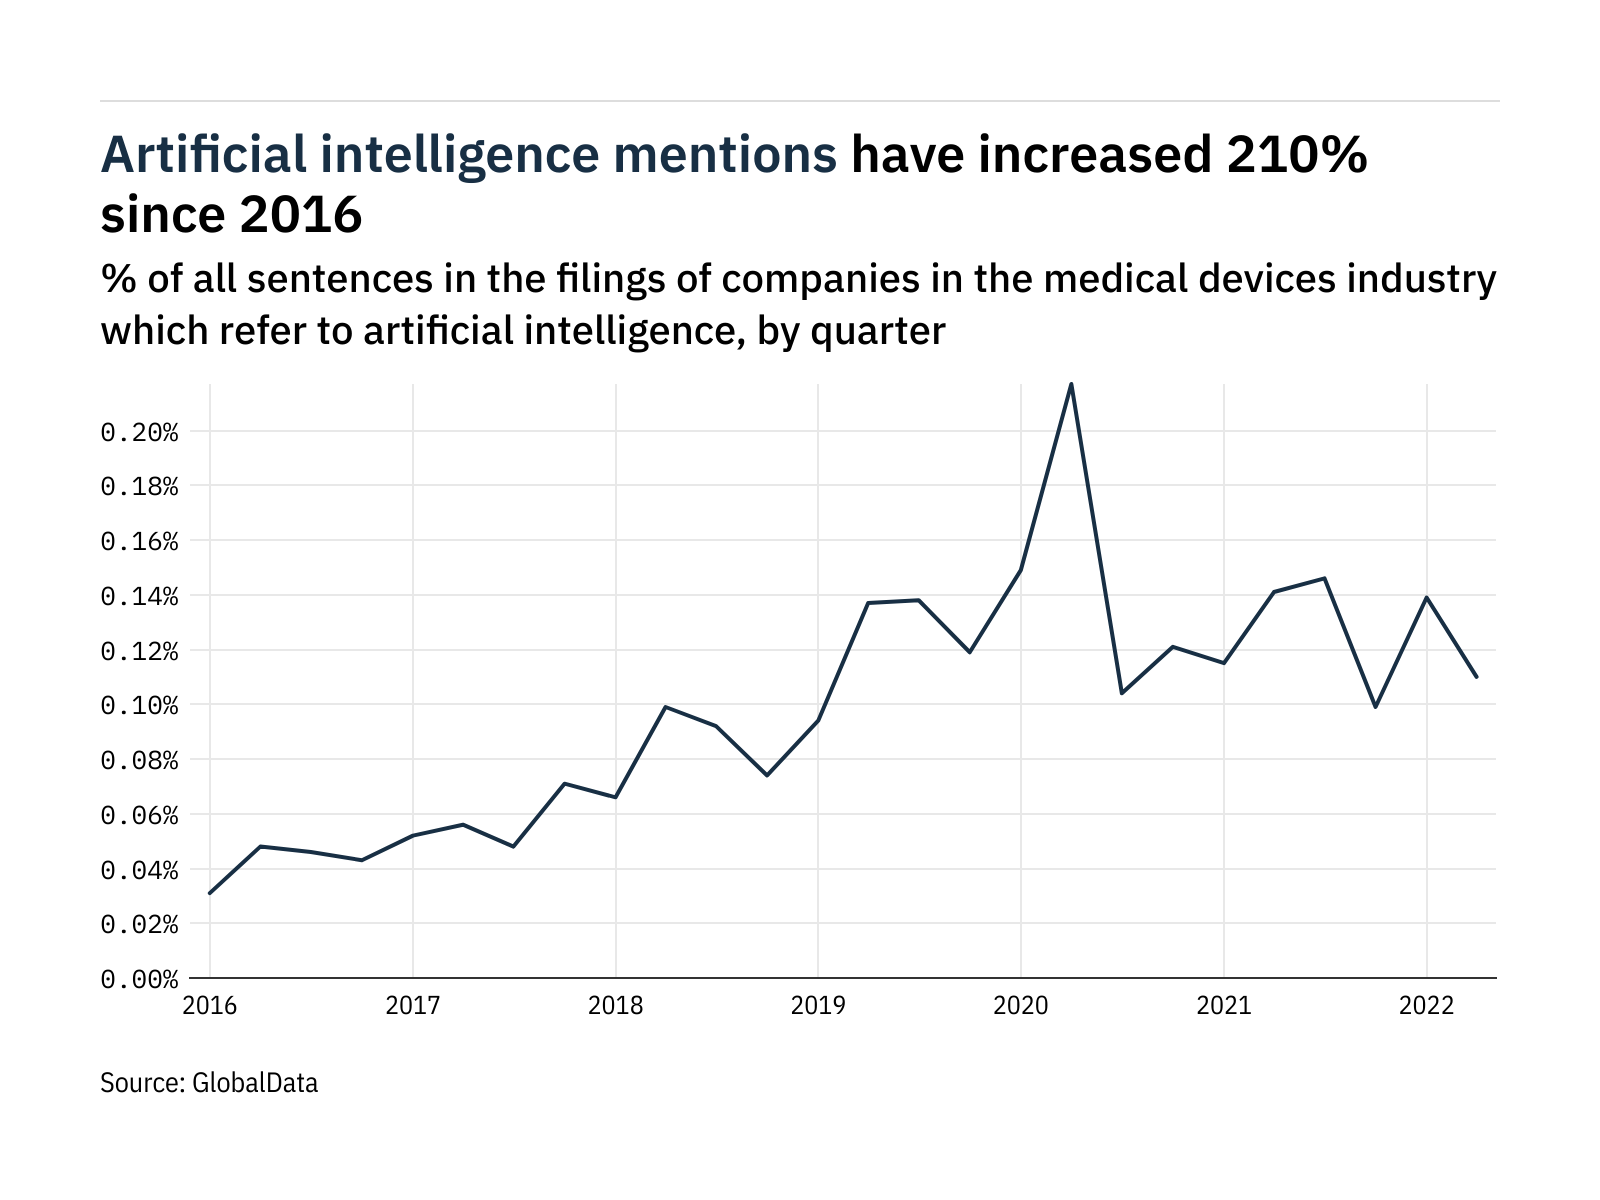 Filings buzz in the medical device industry: 21% decrease in AI mentions in Q2 2022